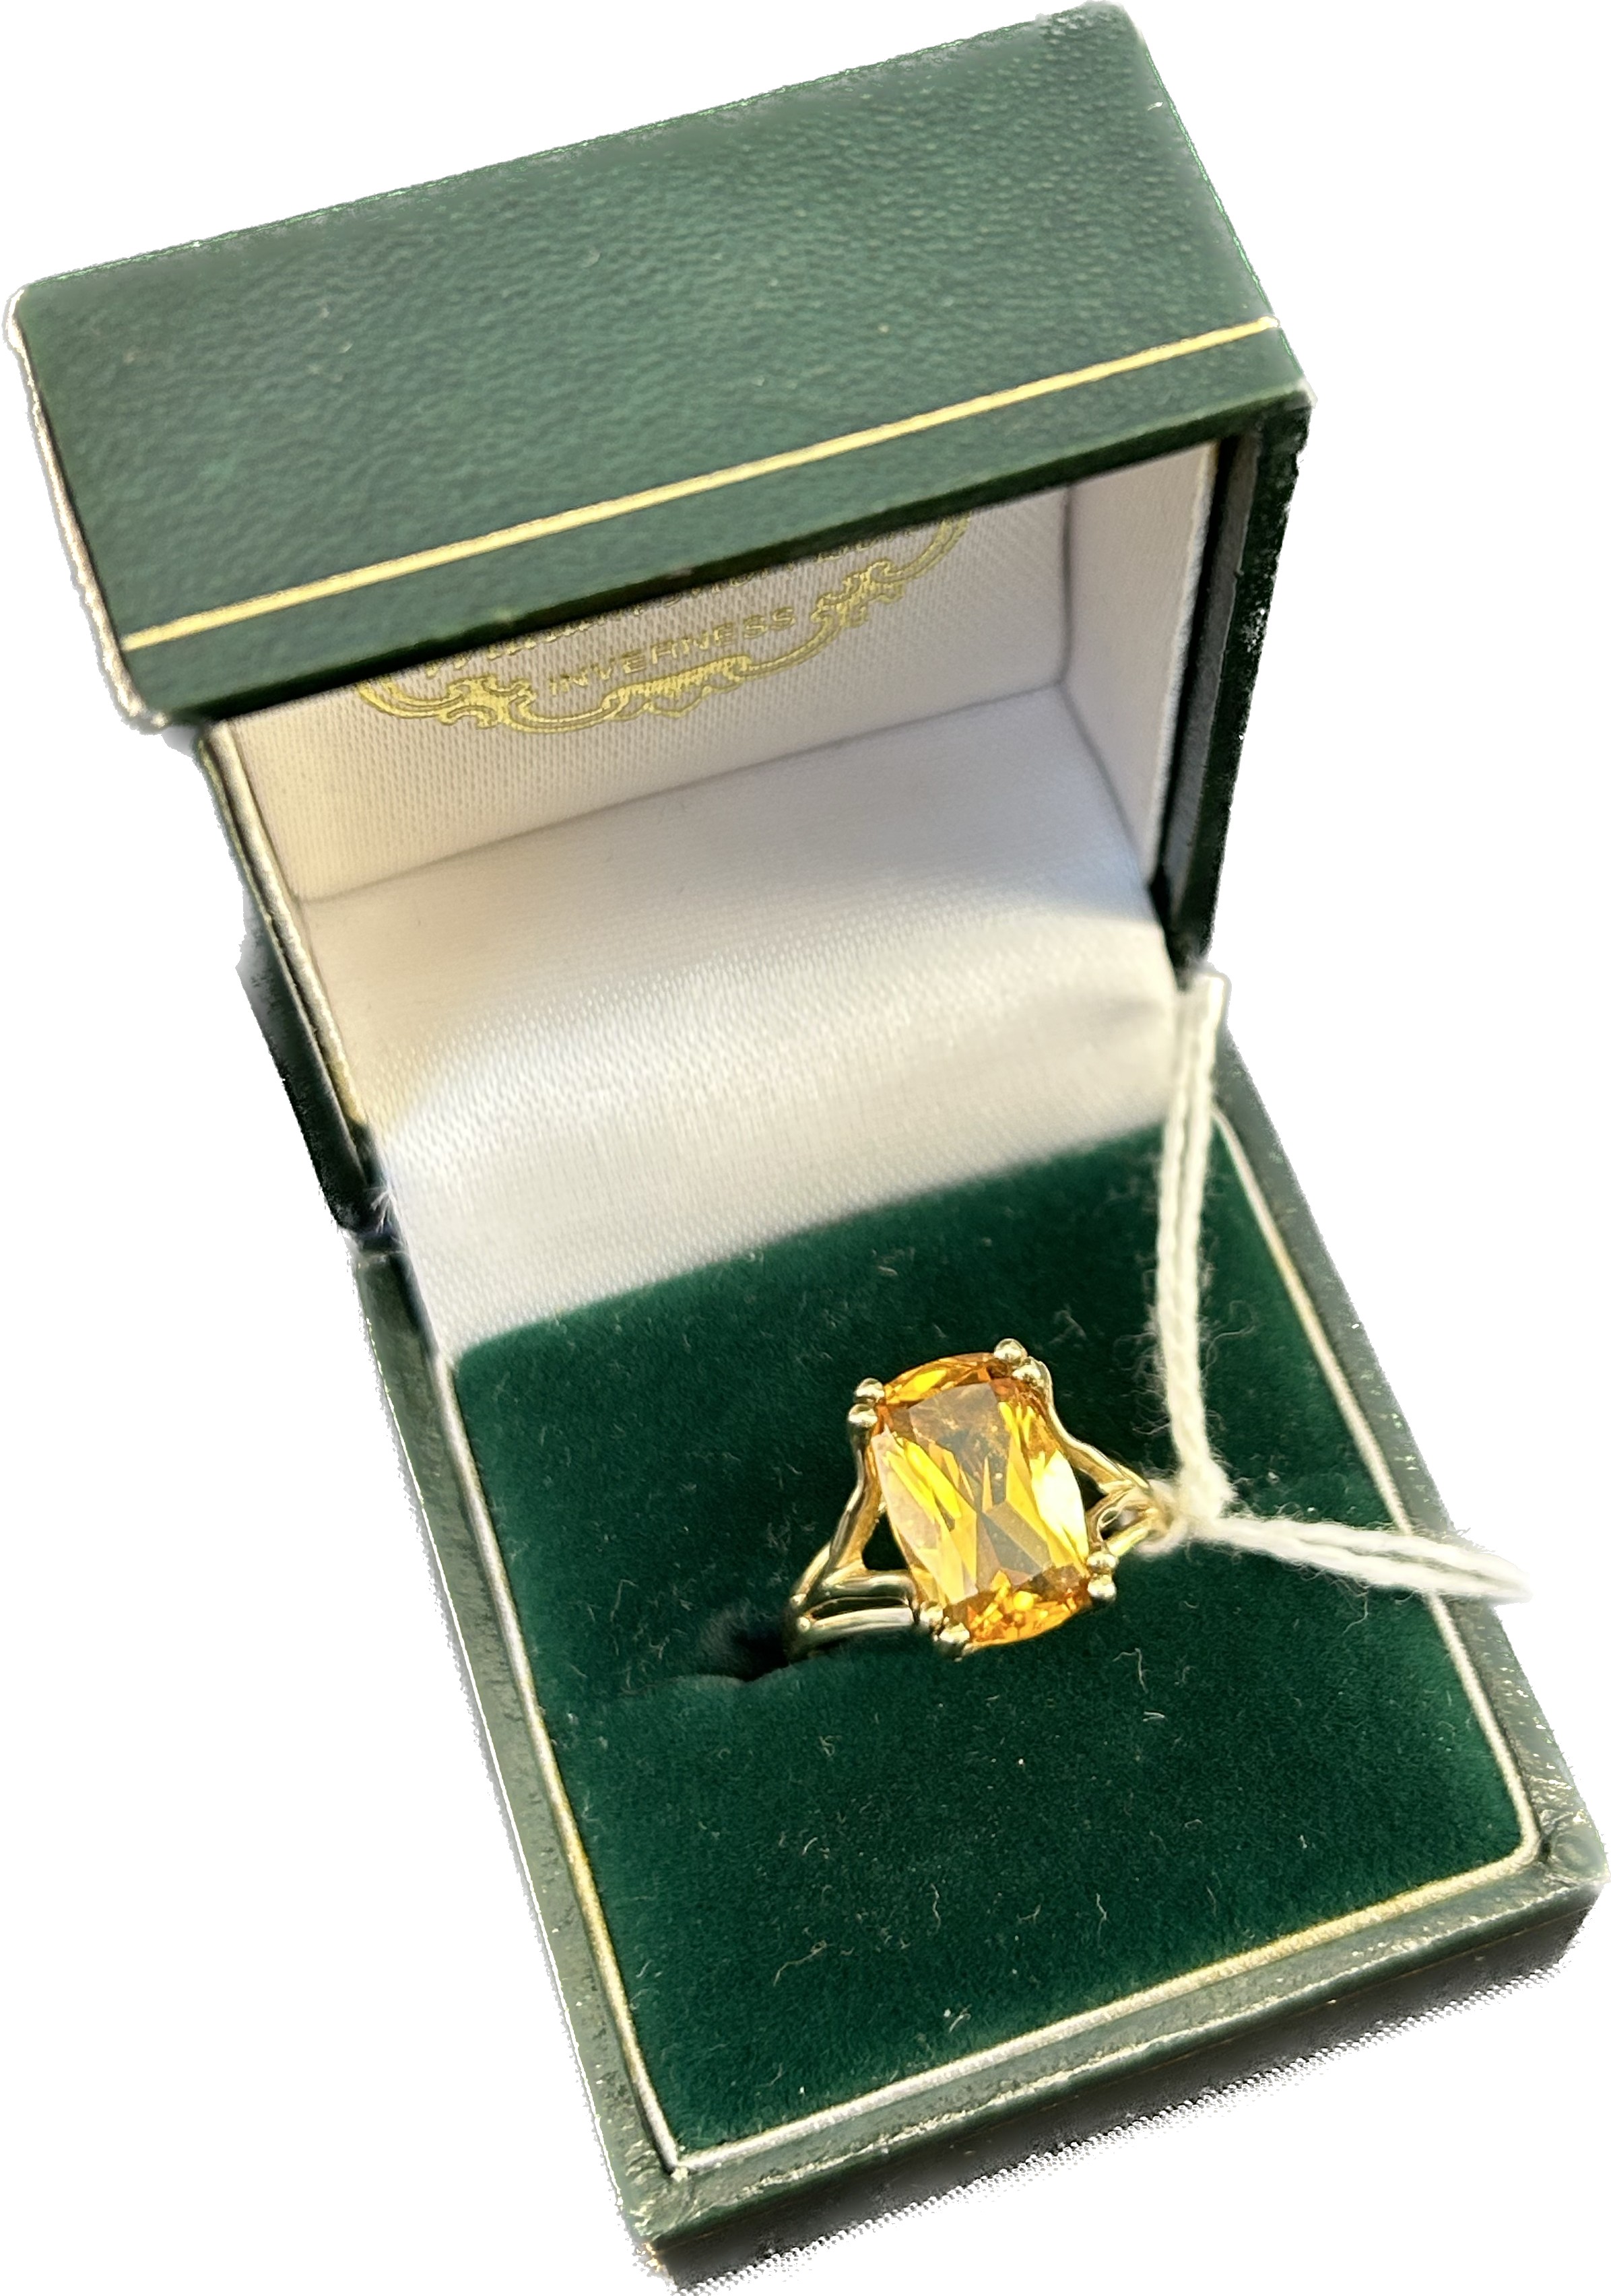 9ct yellow gold ladies ring set with citrine stone. [Ring size N] [2.97Grams]